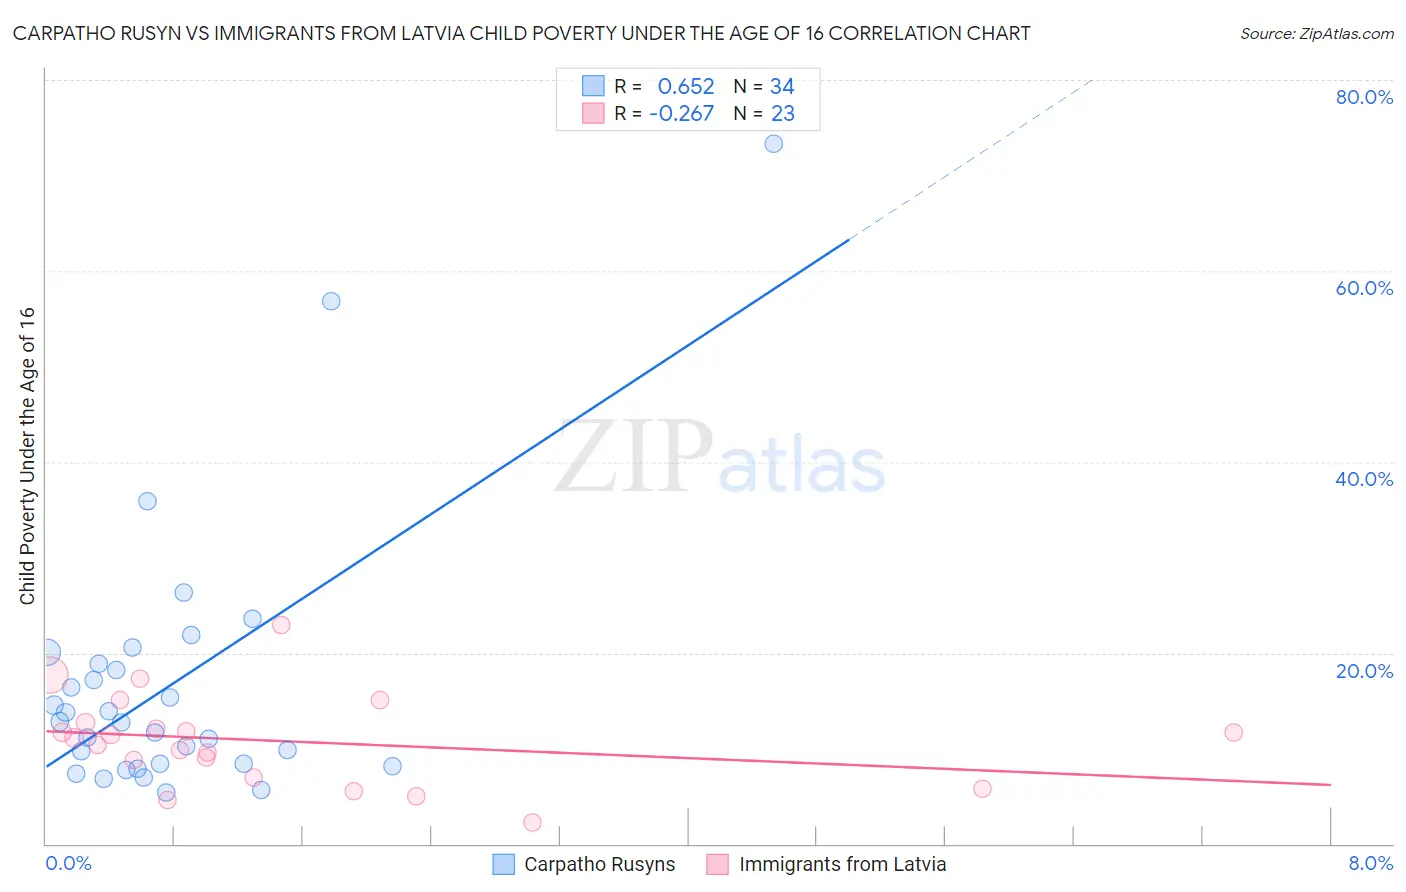 Carpatho Rusyn vs Immigrants from Latvia Child Poverty Under the Age of 16